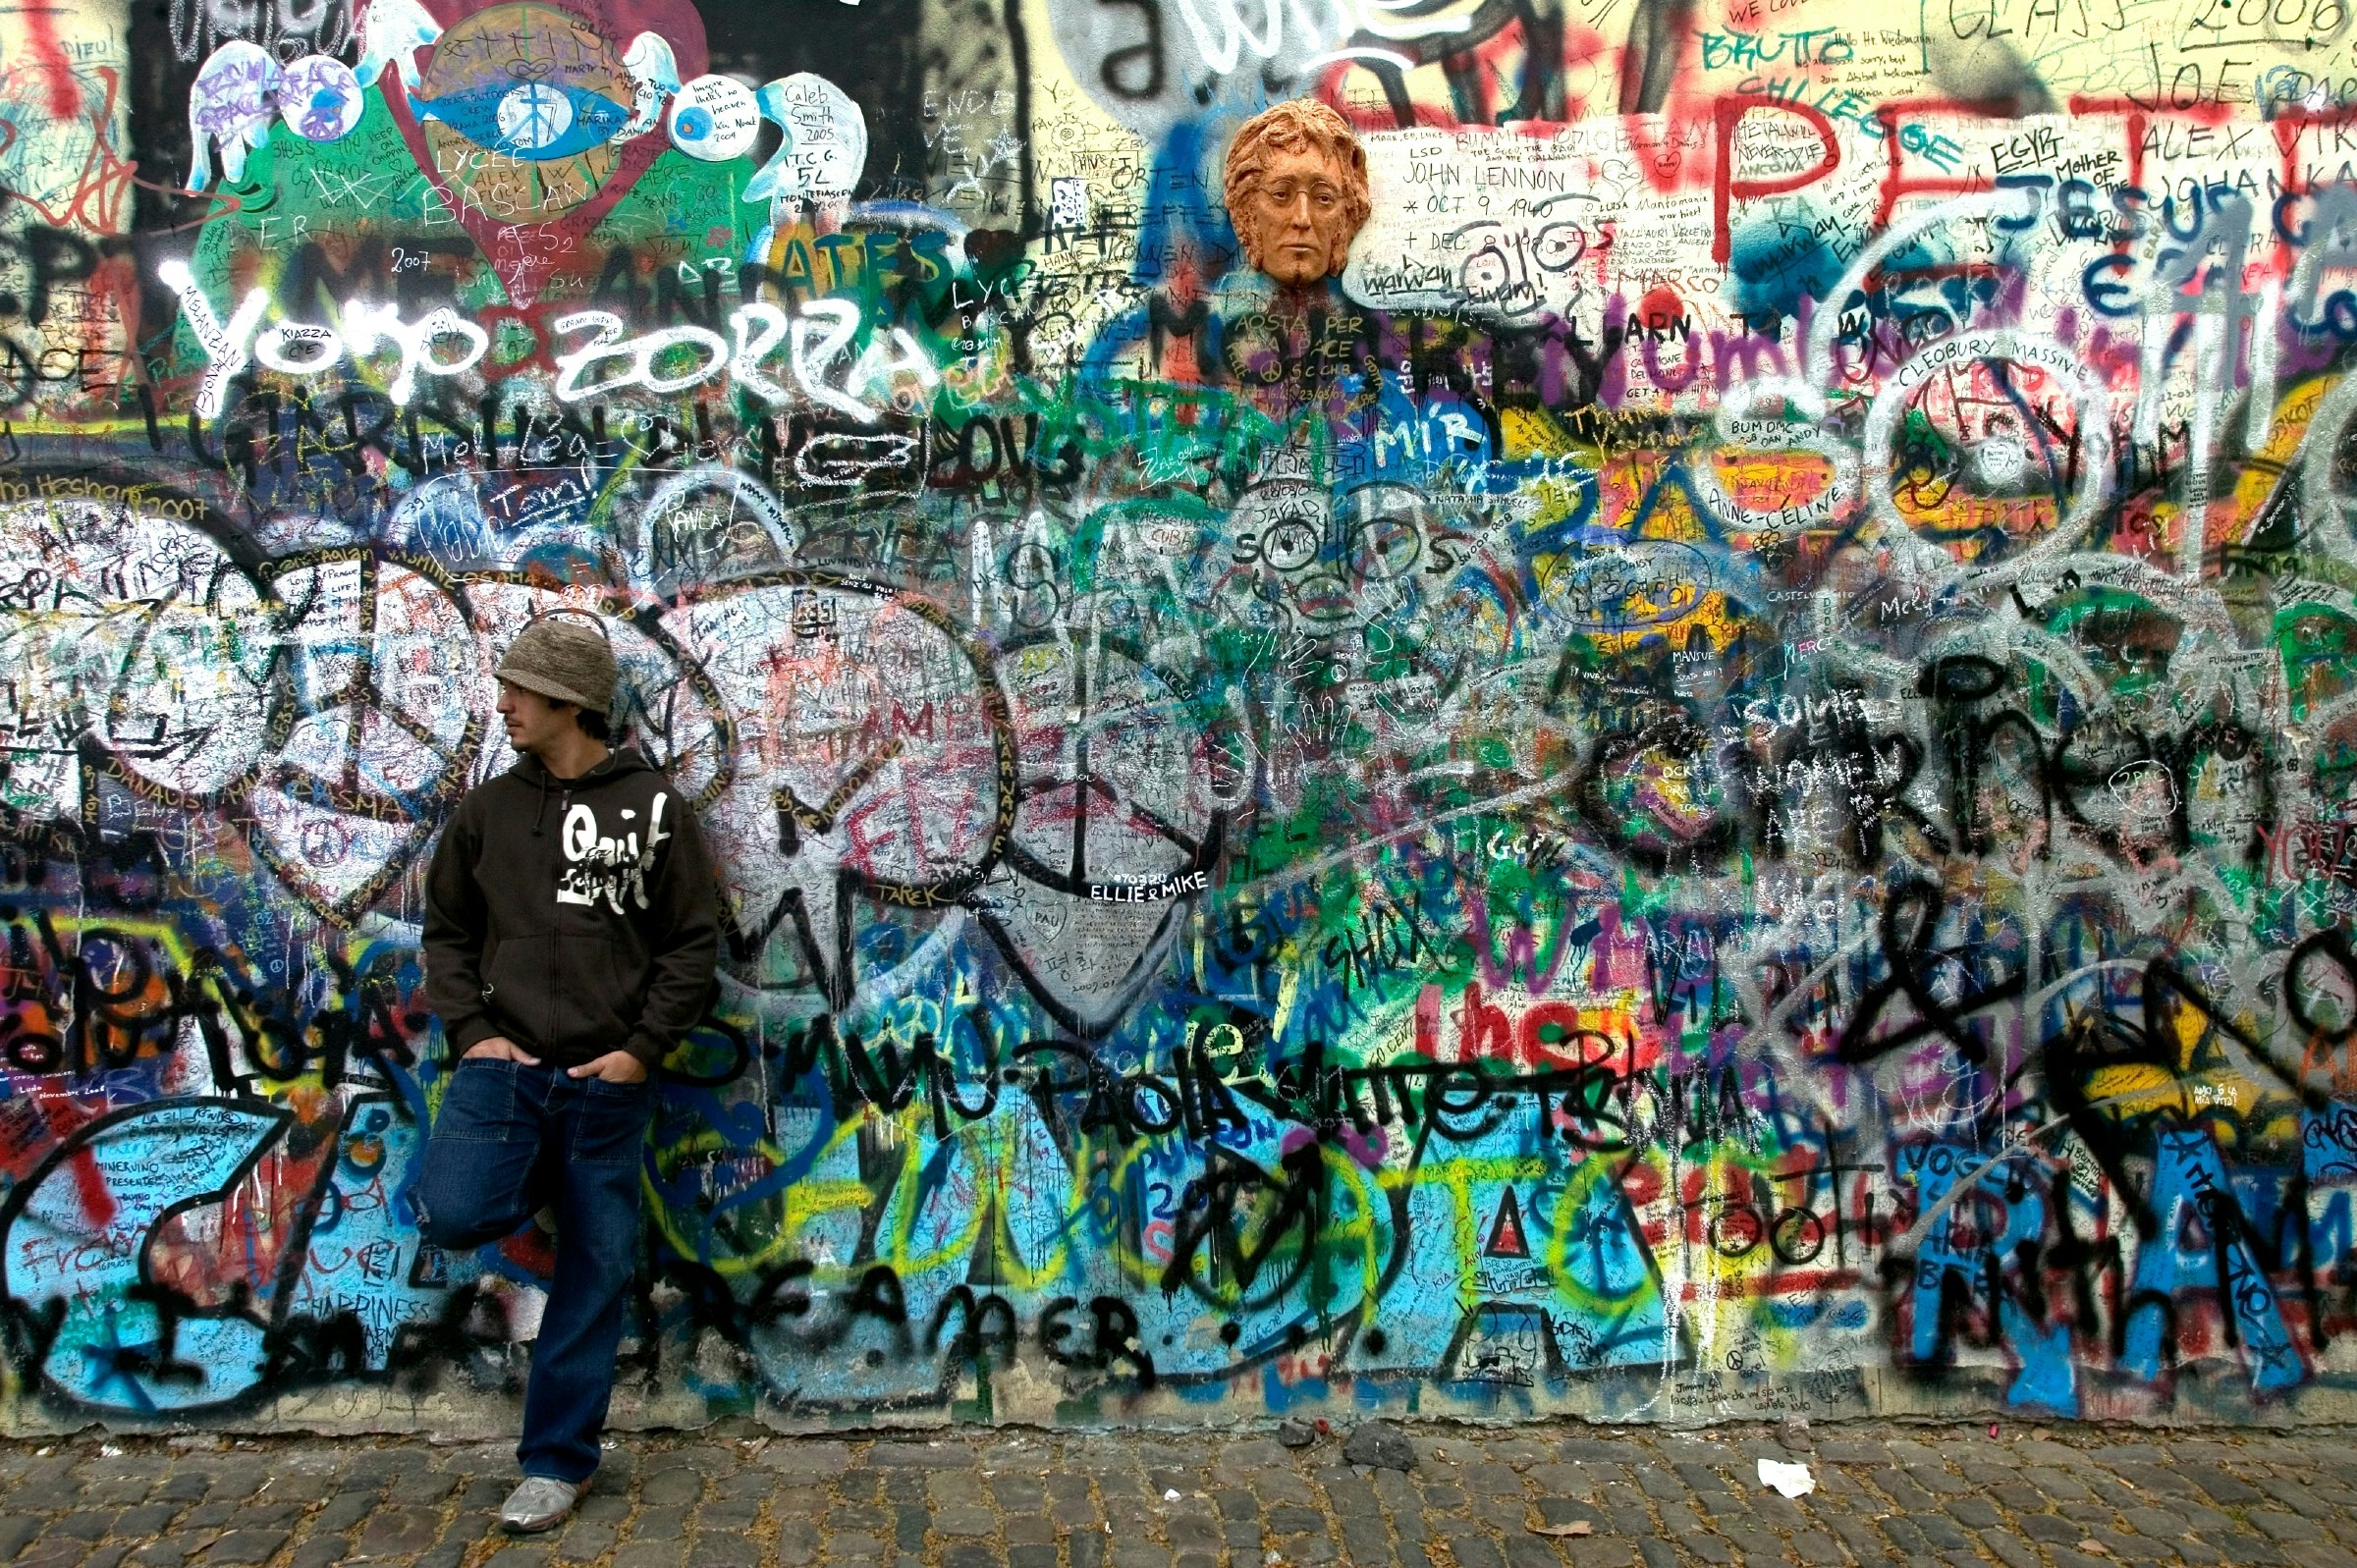 The John Lennon Wall in Prague, covered with graffiti tributes to the late singer